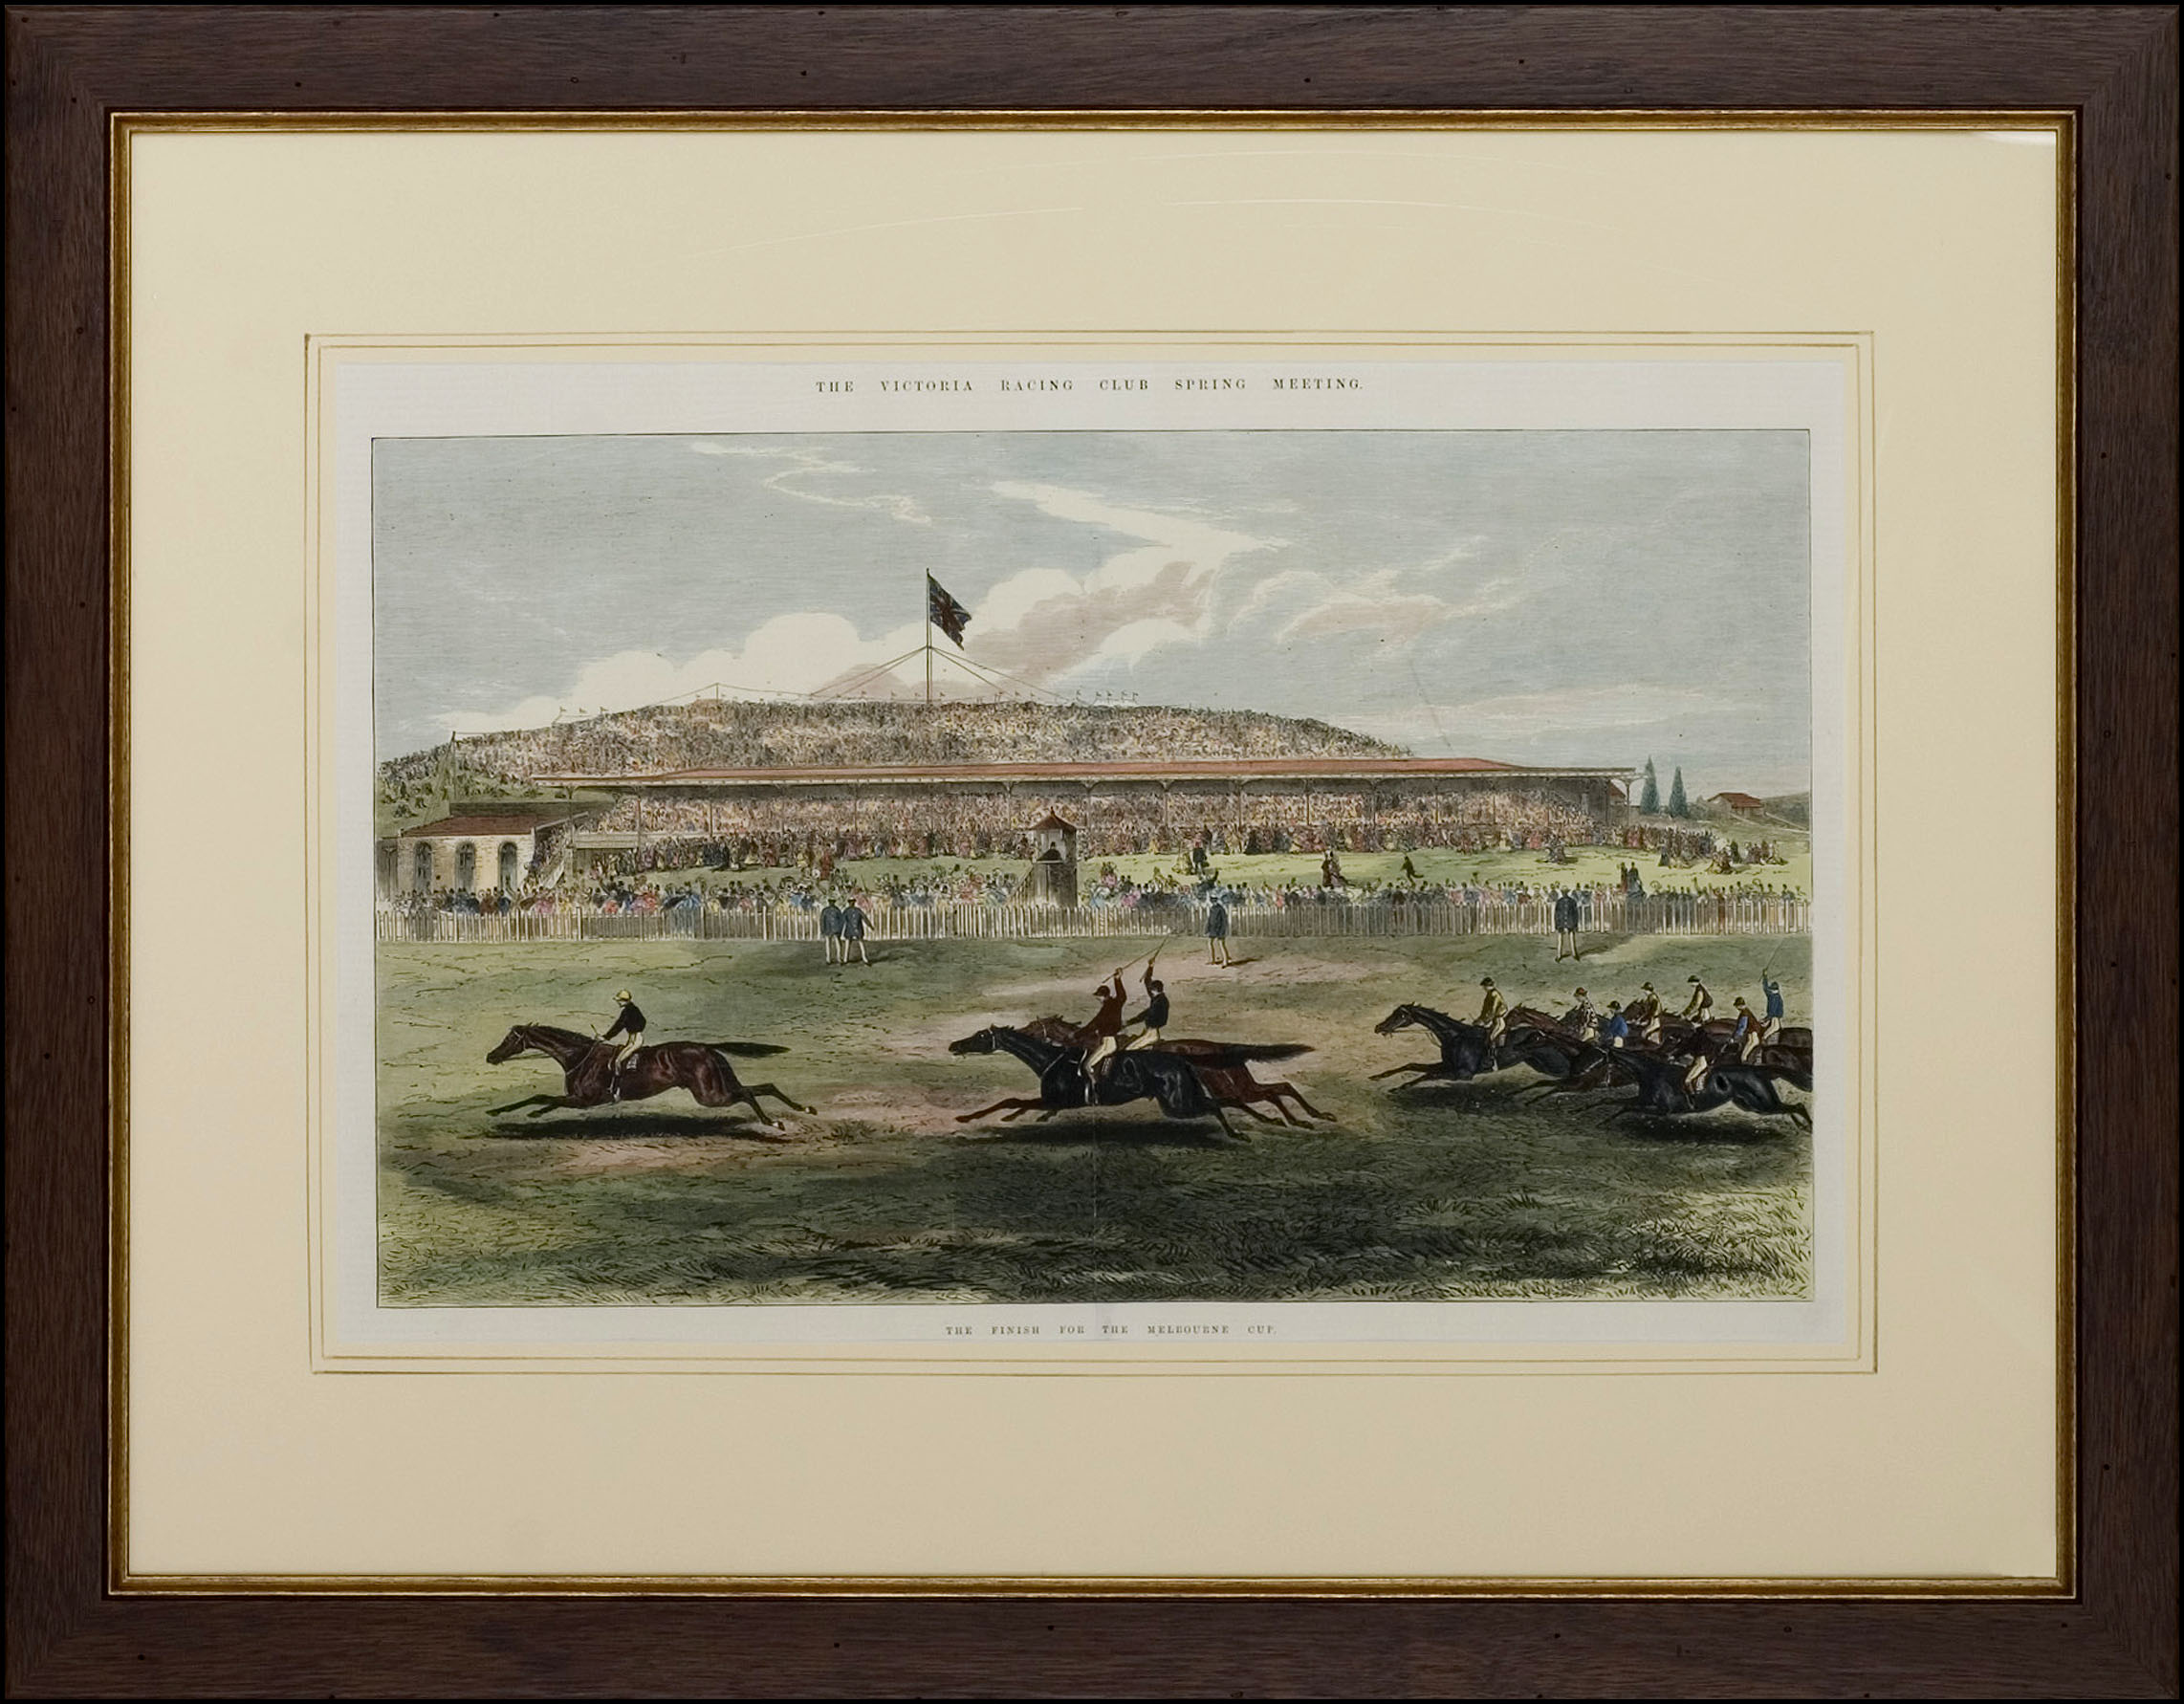 The Finish For the Melbourne Cup - Antique Print from 1874